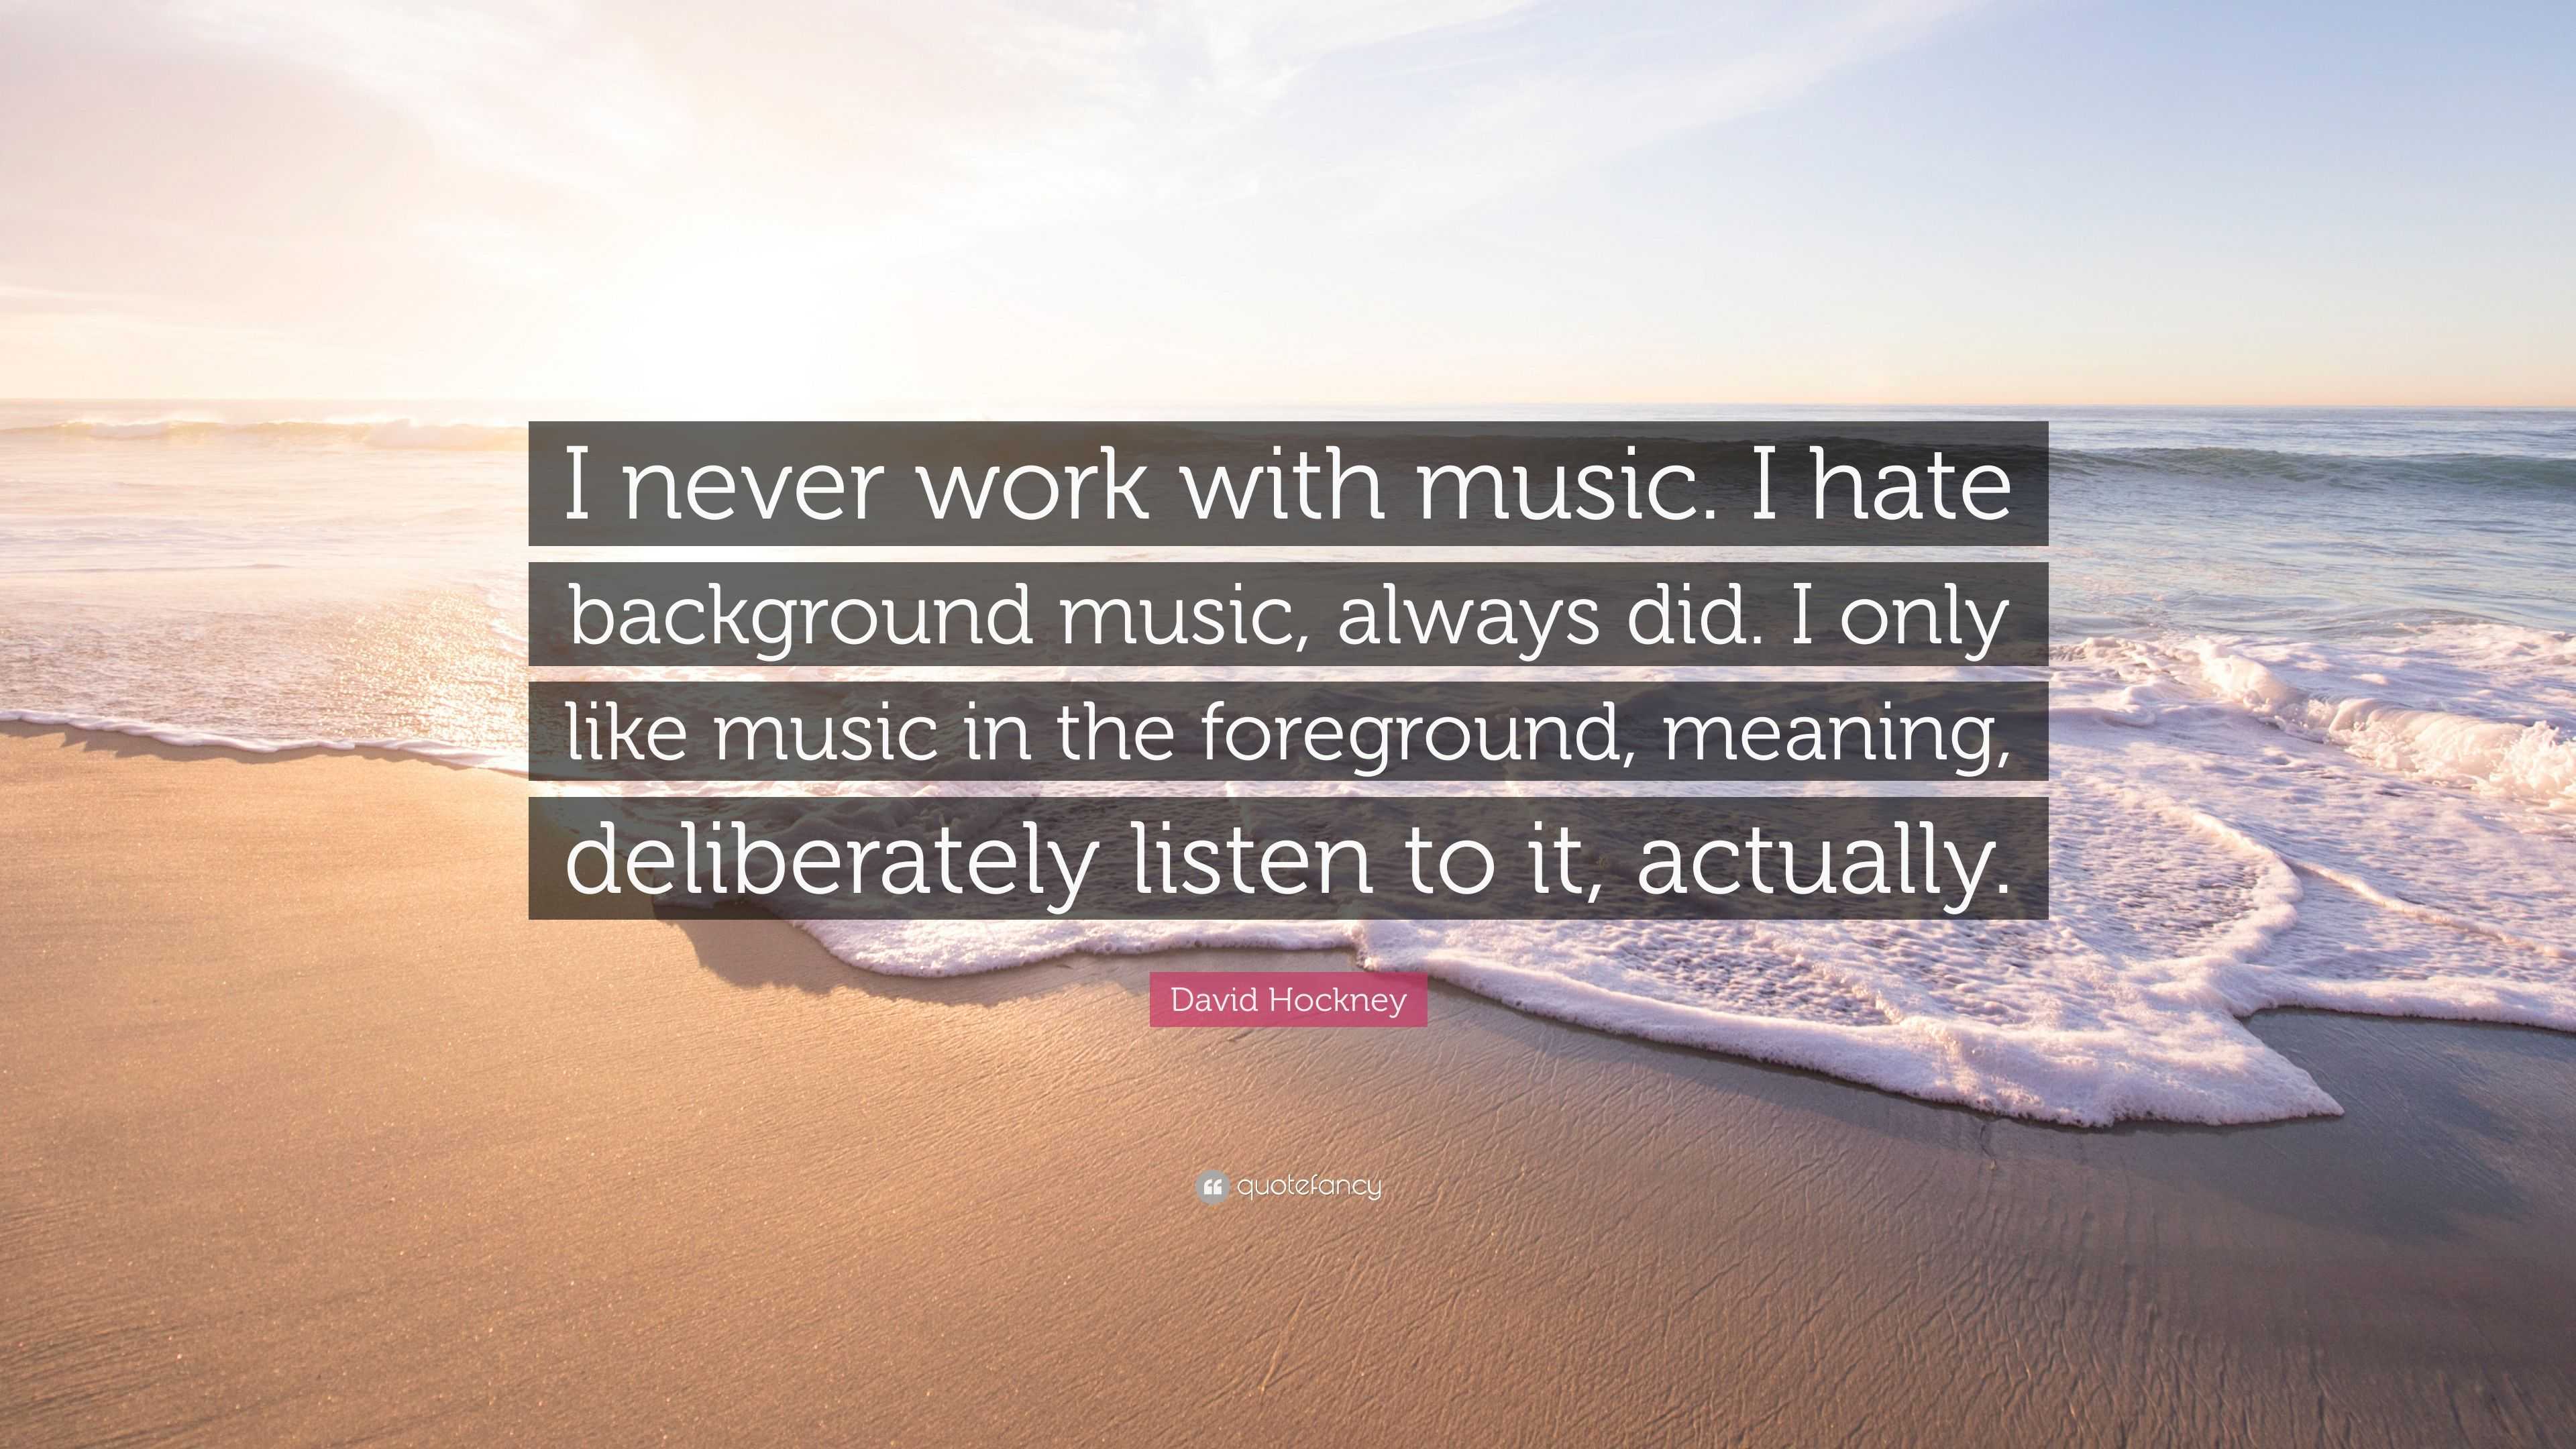 David Hockney Quote: “I never work with music. I hate background music,  always did. I only like music in the foreground, meaning, deliberately...”